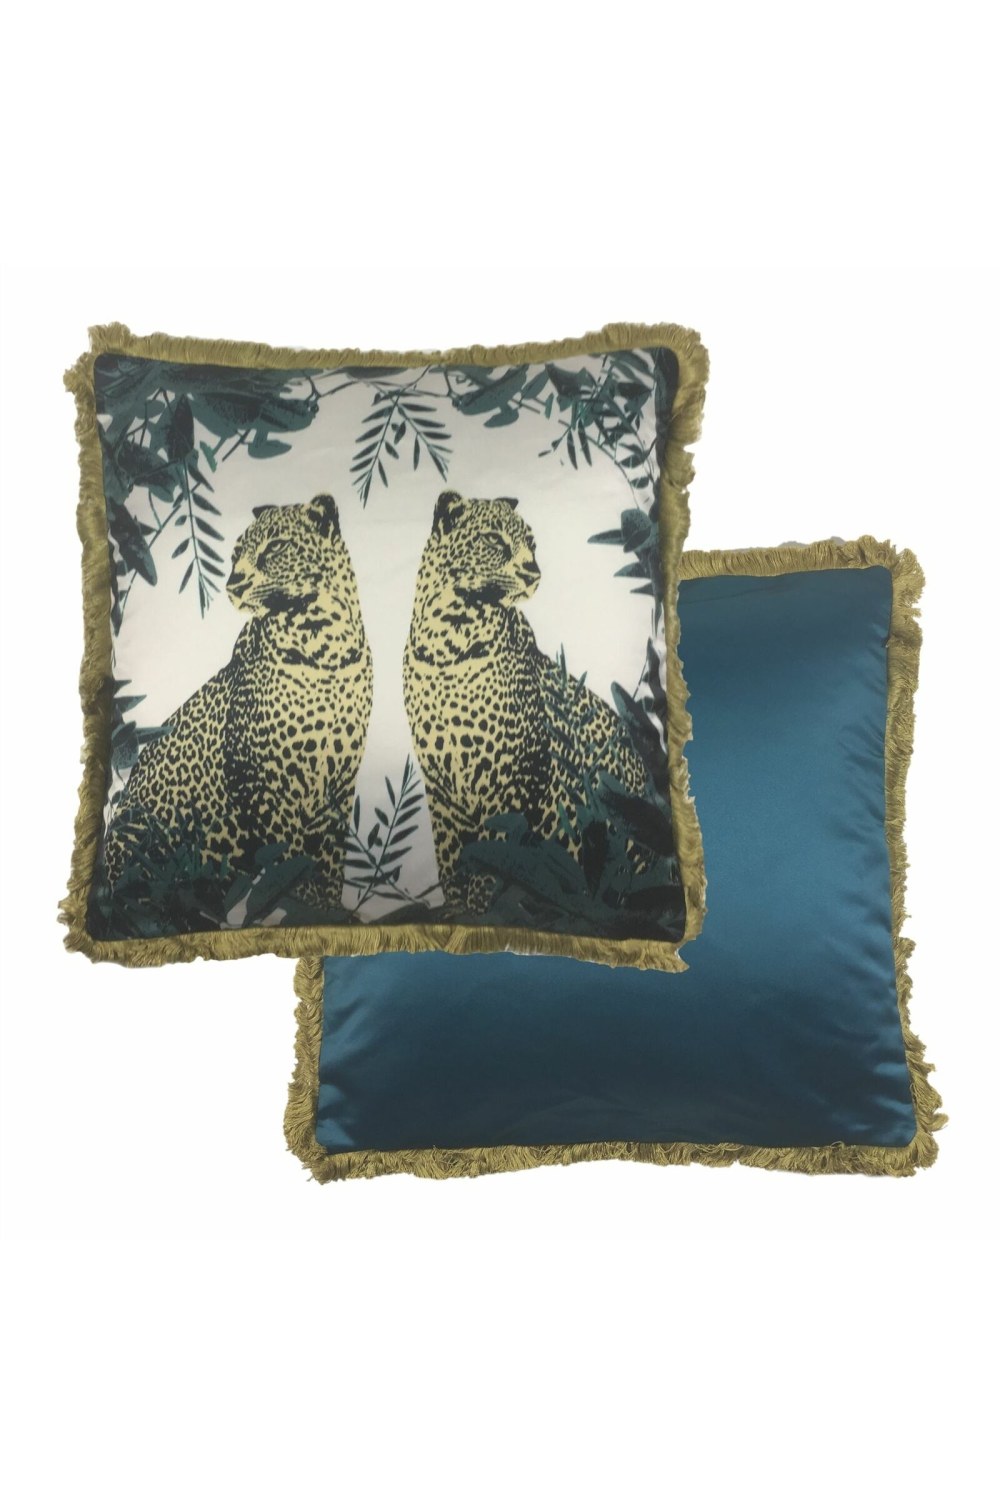 Leopard Cushion Cover - Teal/Ochre Yellow